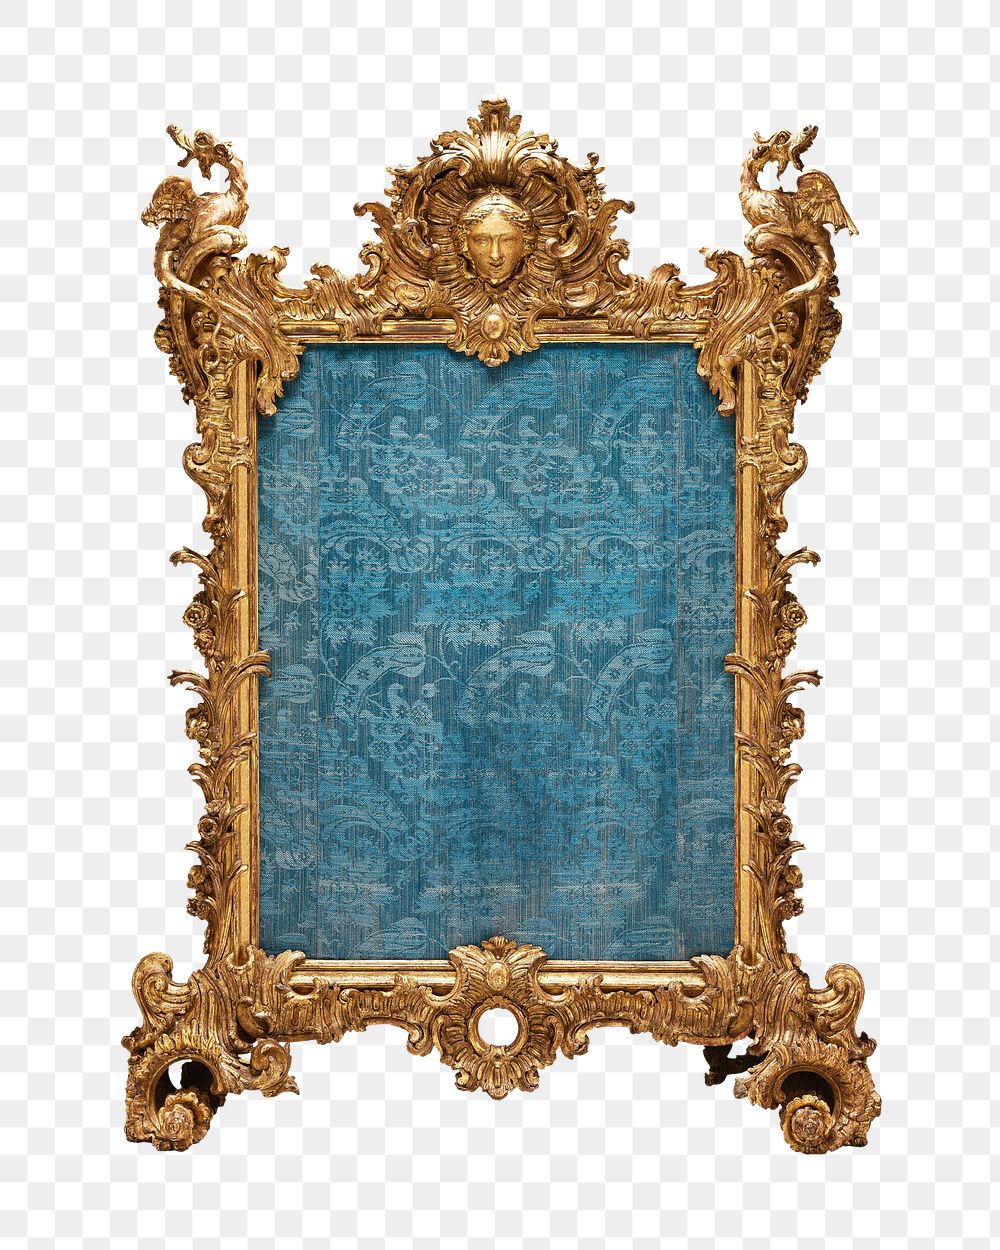 PNG Gold luxury frame, vintage object carved by Ferdinand Hundt, transparent background. Remixed by rawpixel.